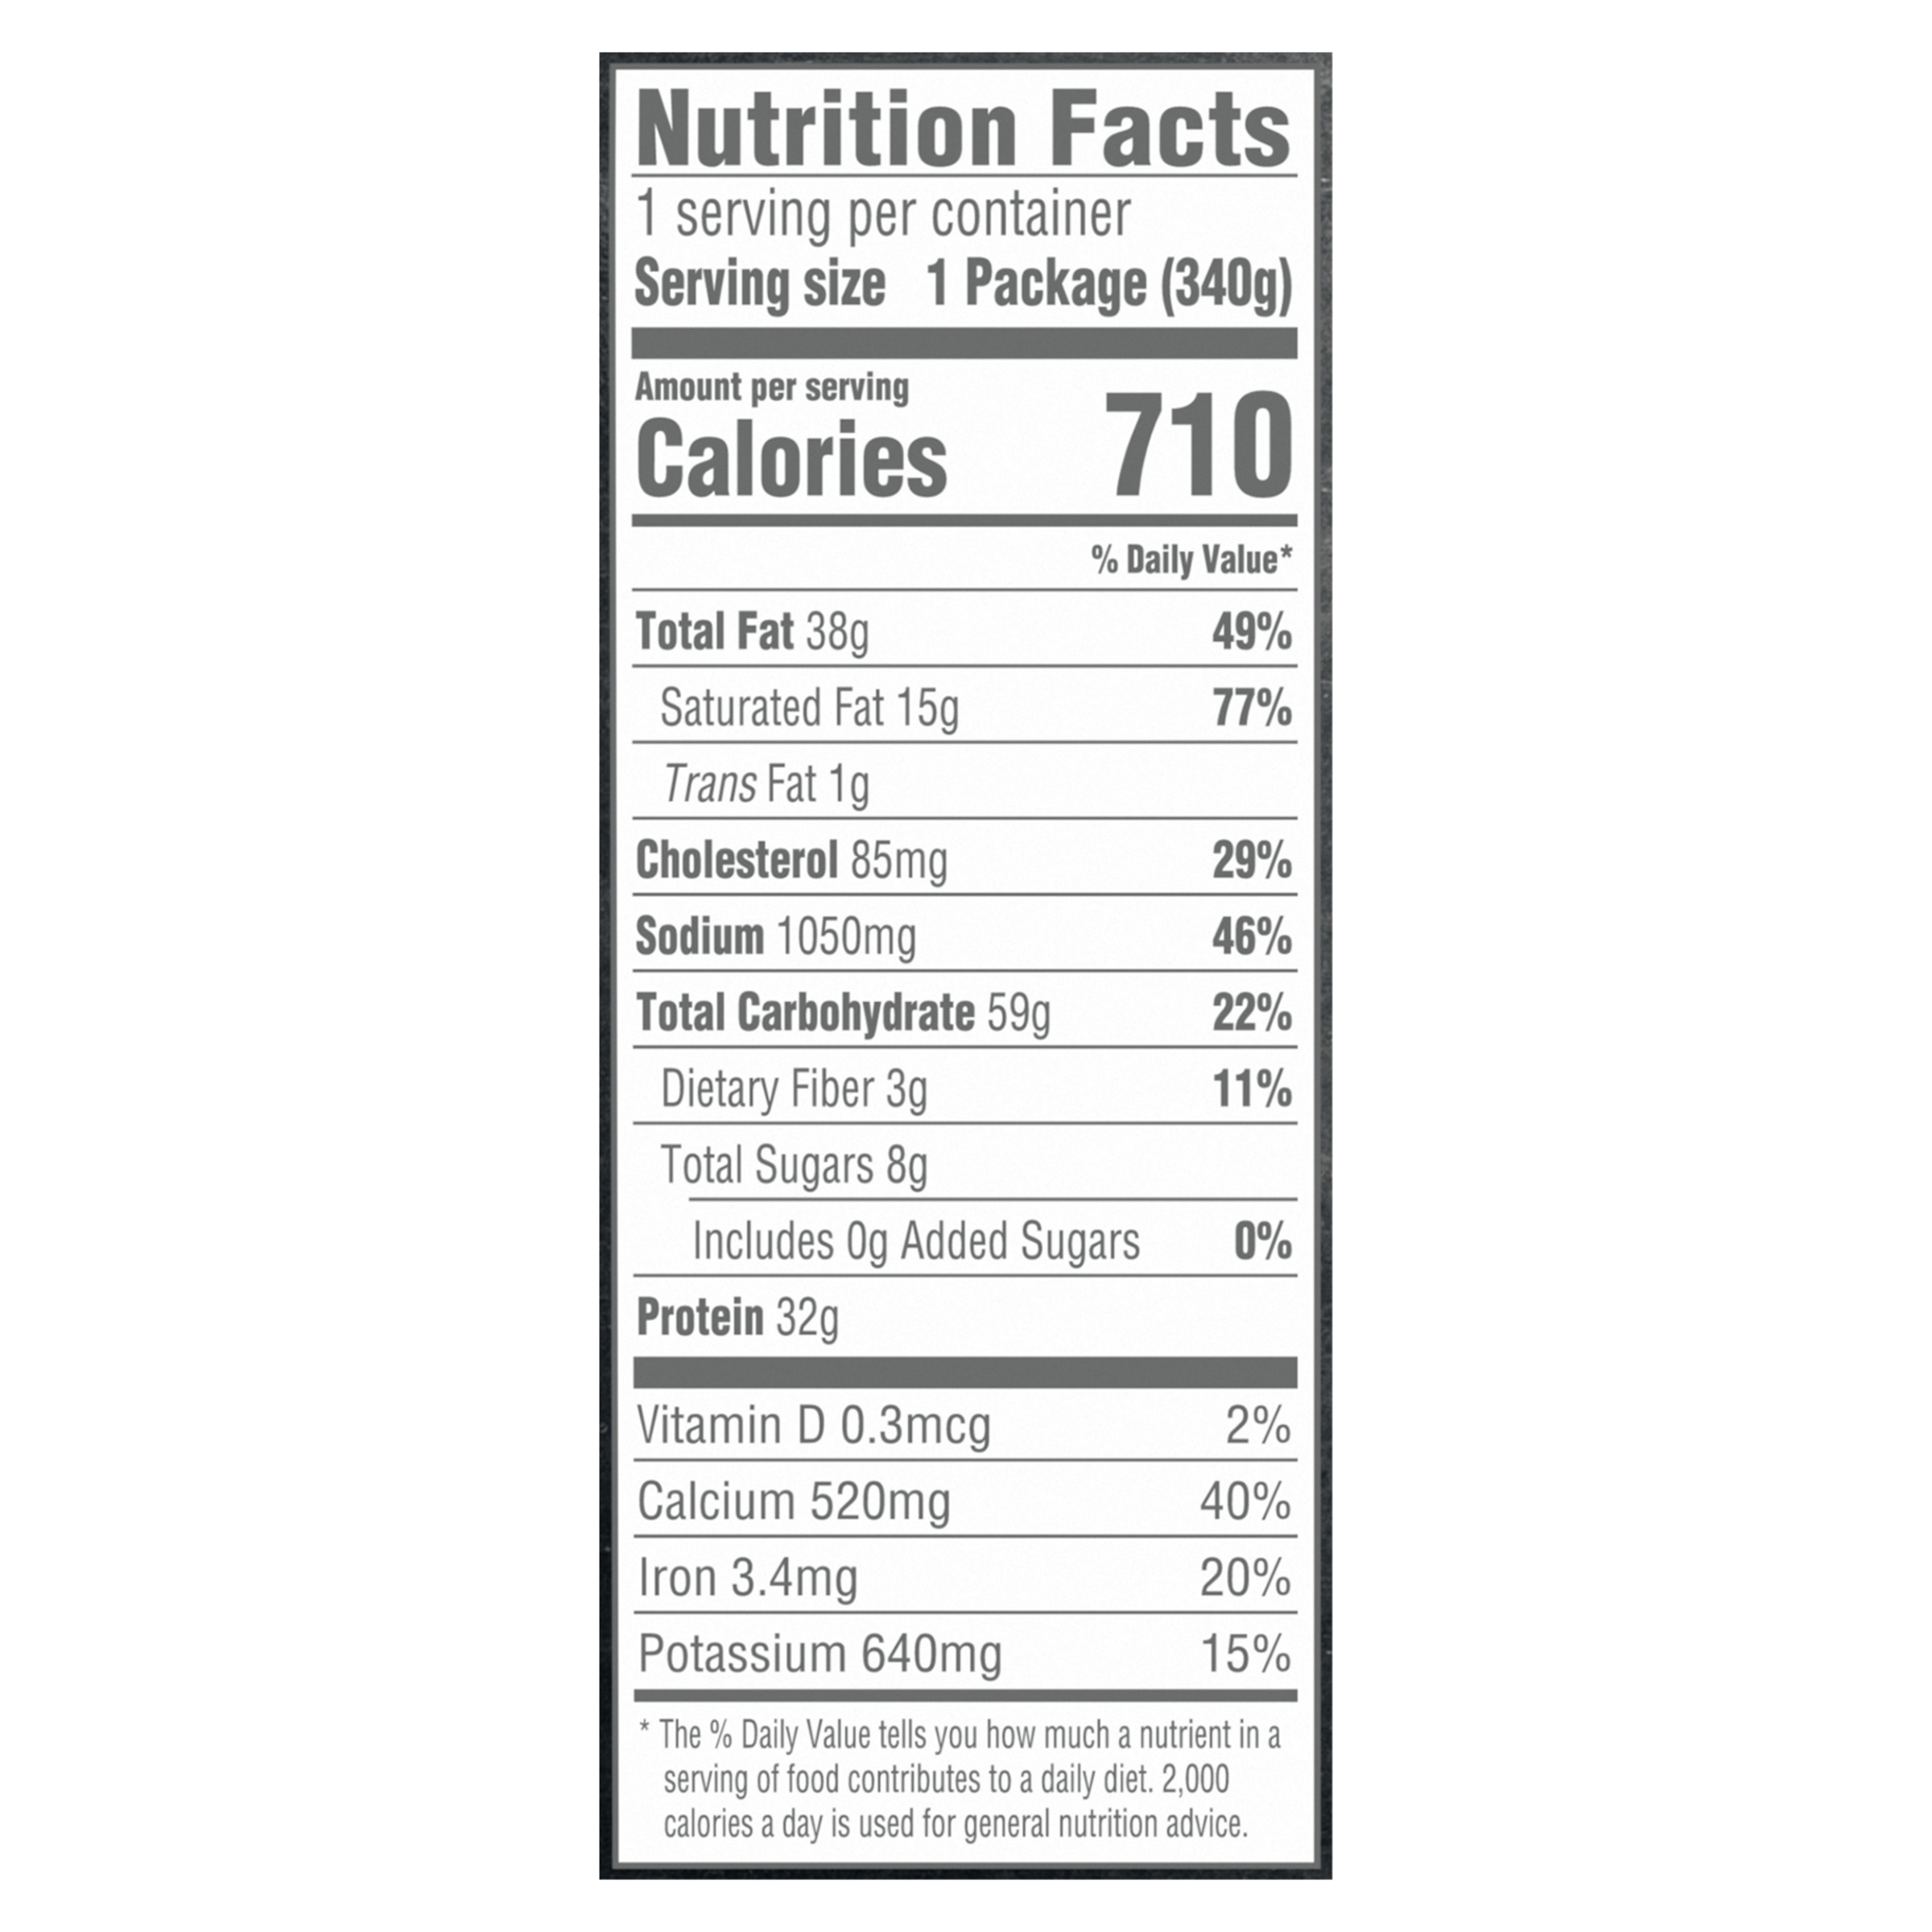 product nutritional facts image